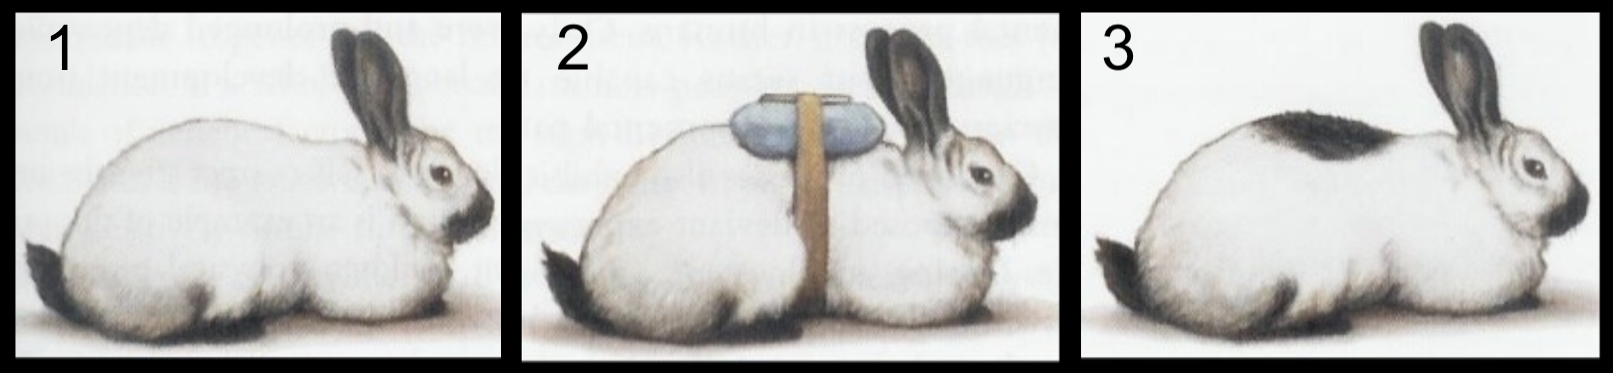 Image 1: Mostly white rabbit with black tail, paws, ears, and muzzle. Image 2: Rabbit has a cooling pack strapped to its back. Image 3: Rabbit now has dark patch of fur on its back where the cooling pack was located in image 2.